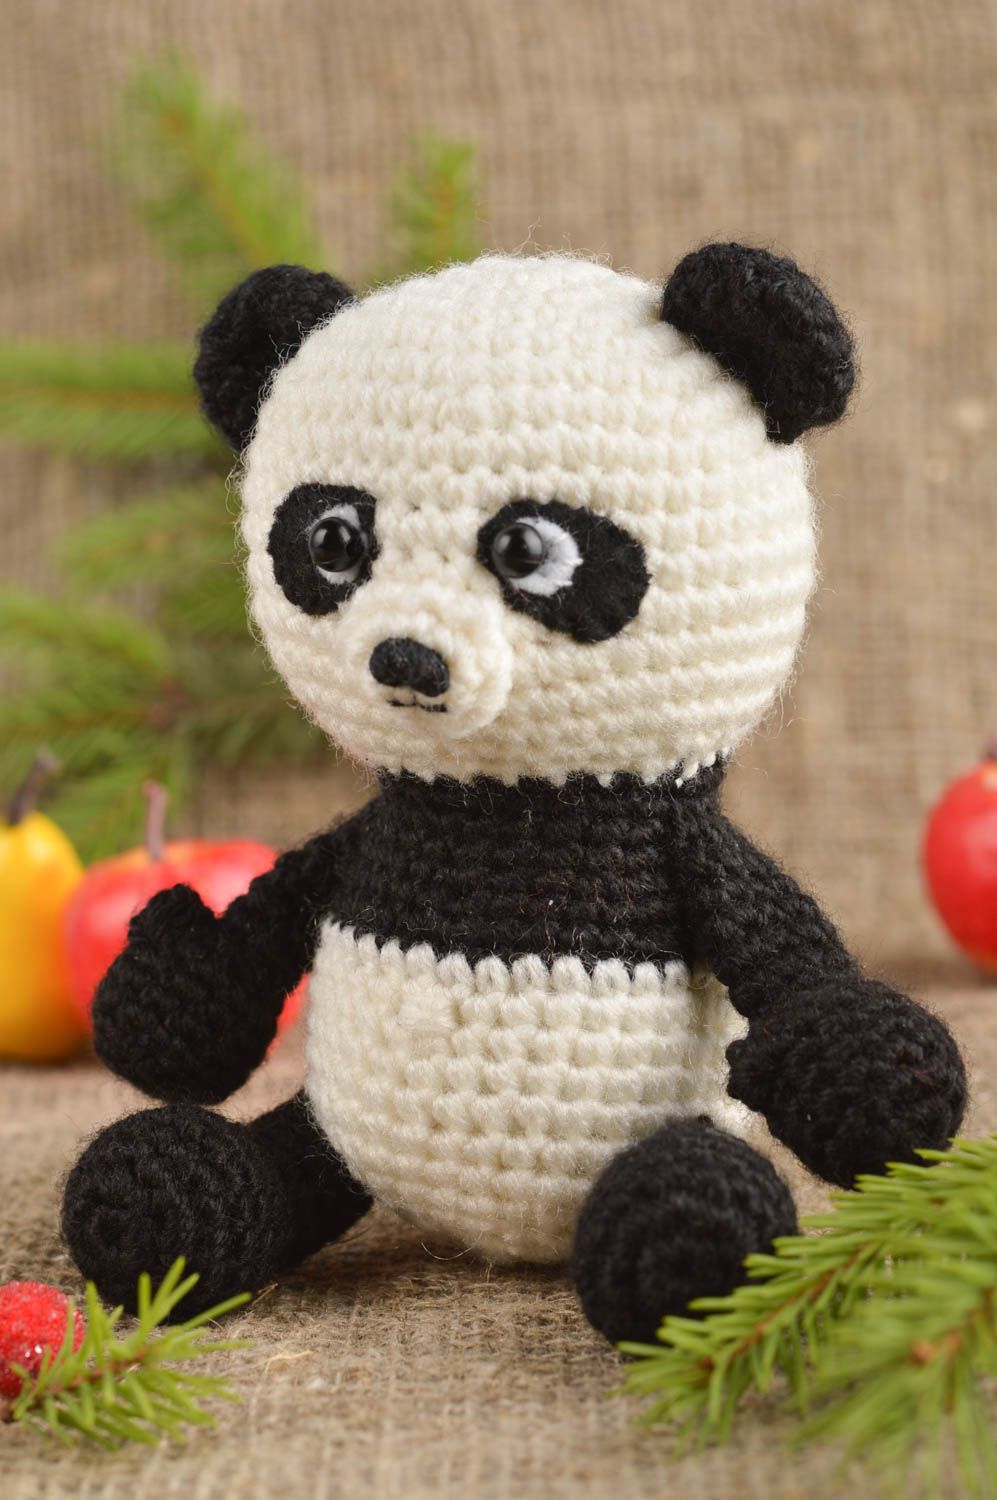 Handmade crocheted toy baby soft toy crocheted panda toy design crocheted toy   photo 1